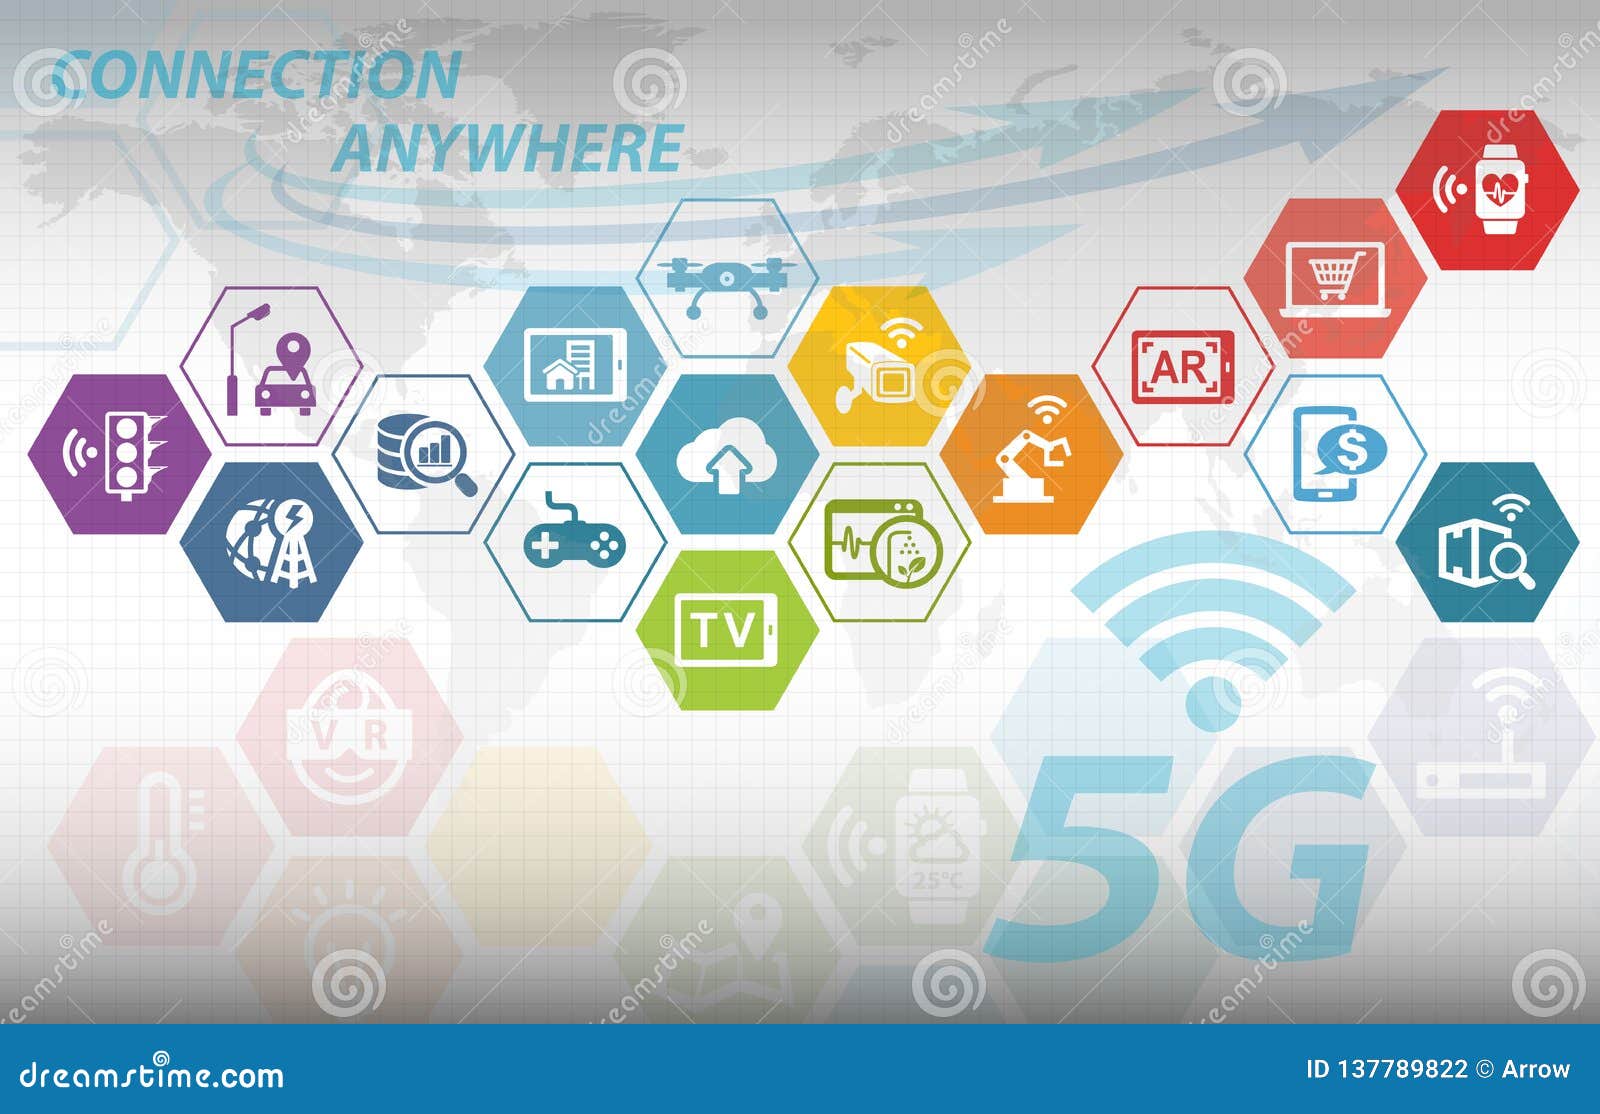 5g network wireless technology connection anywhere